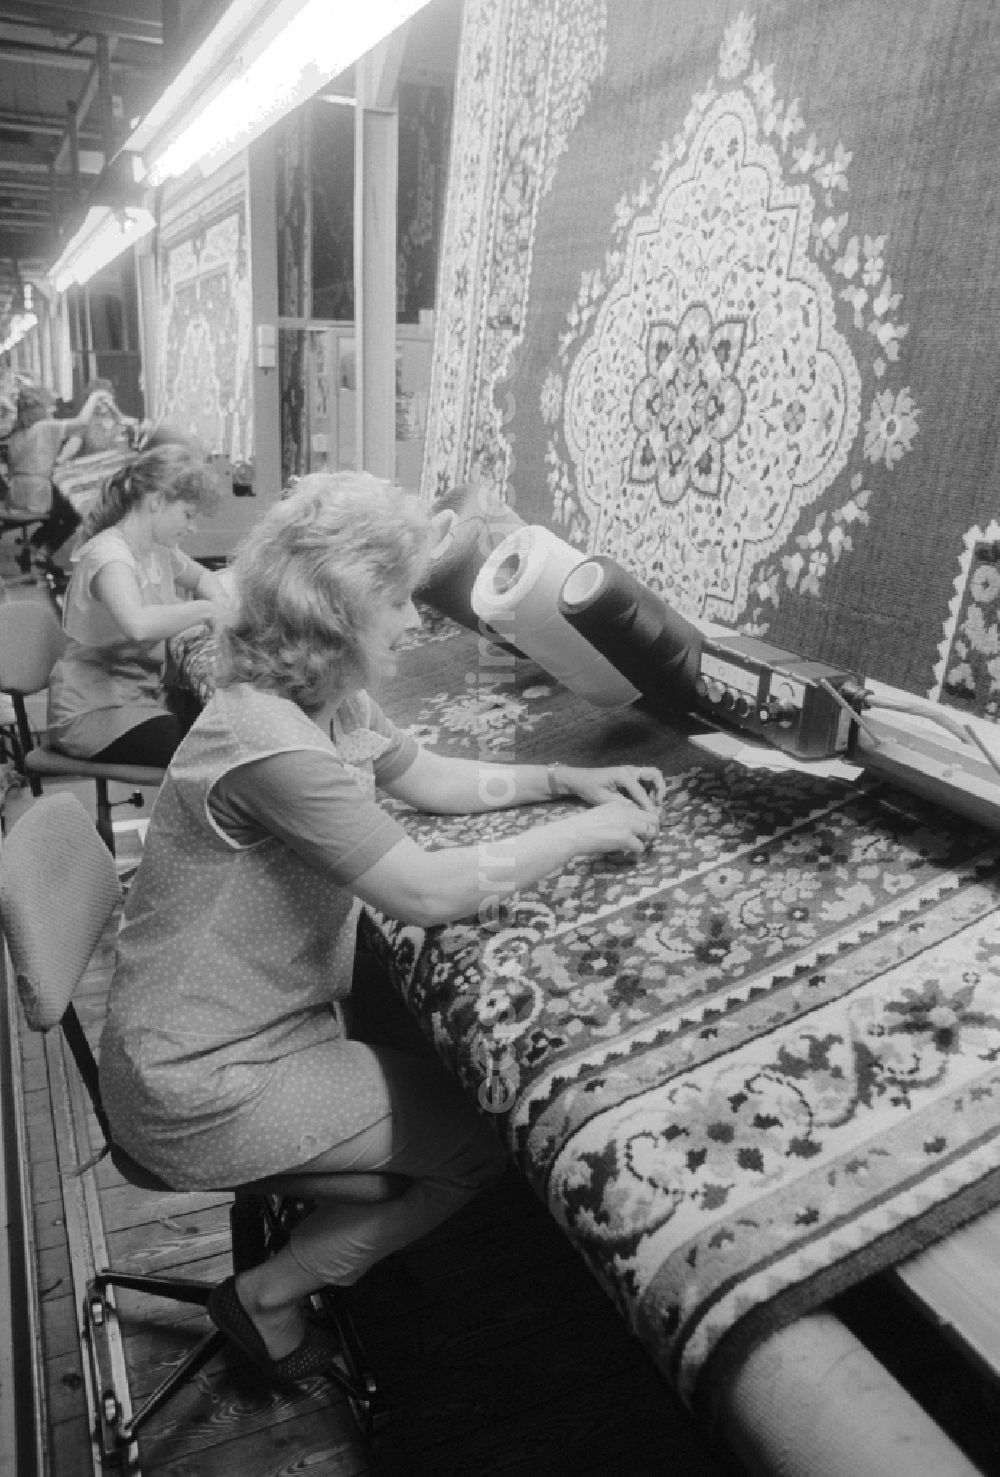 GDR image archive: Malchow - View of the production halls of the VEB Carpet Factory North Malchow in Malchow in Mecklenburg-Western Pomerania in the field of the former GDR, German Democratic Republic